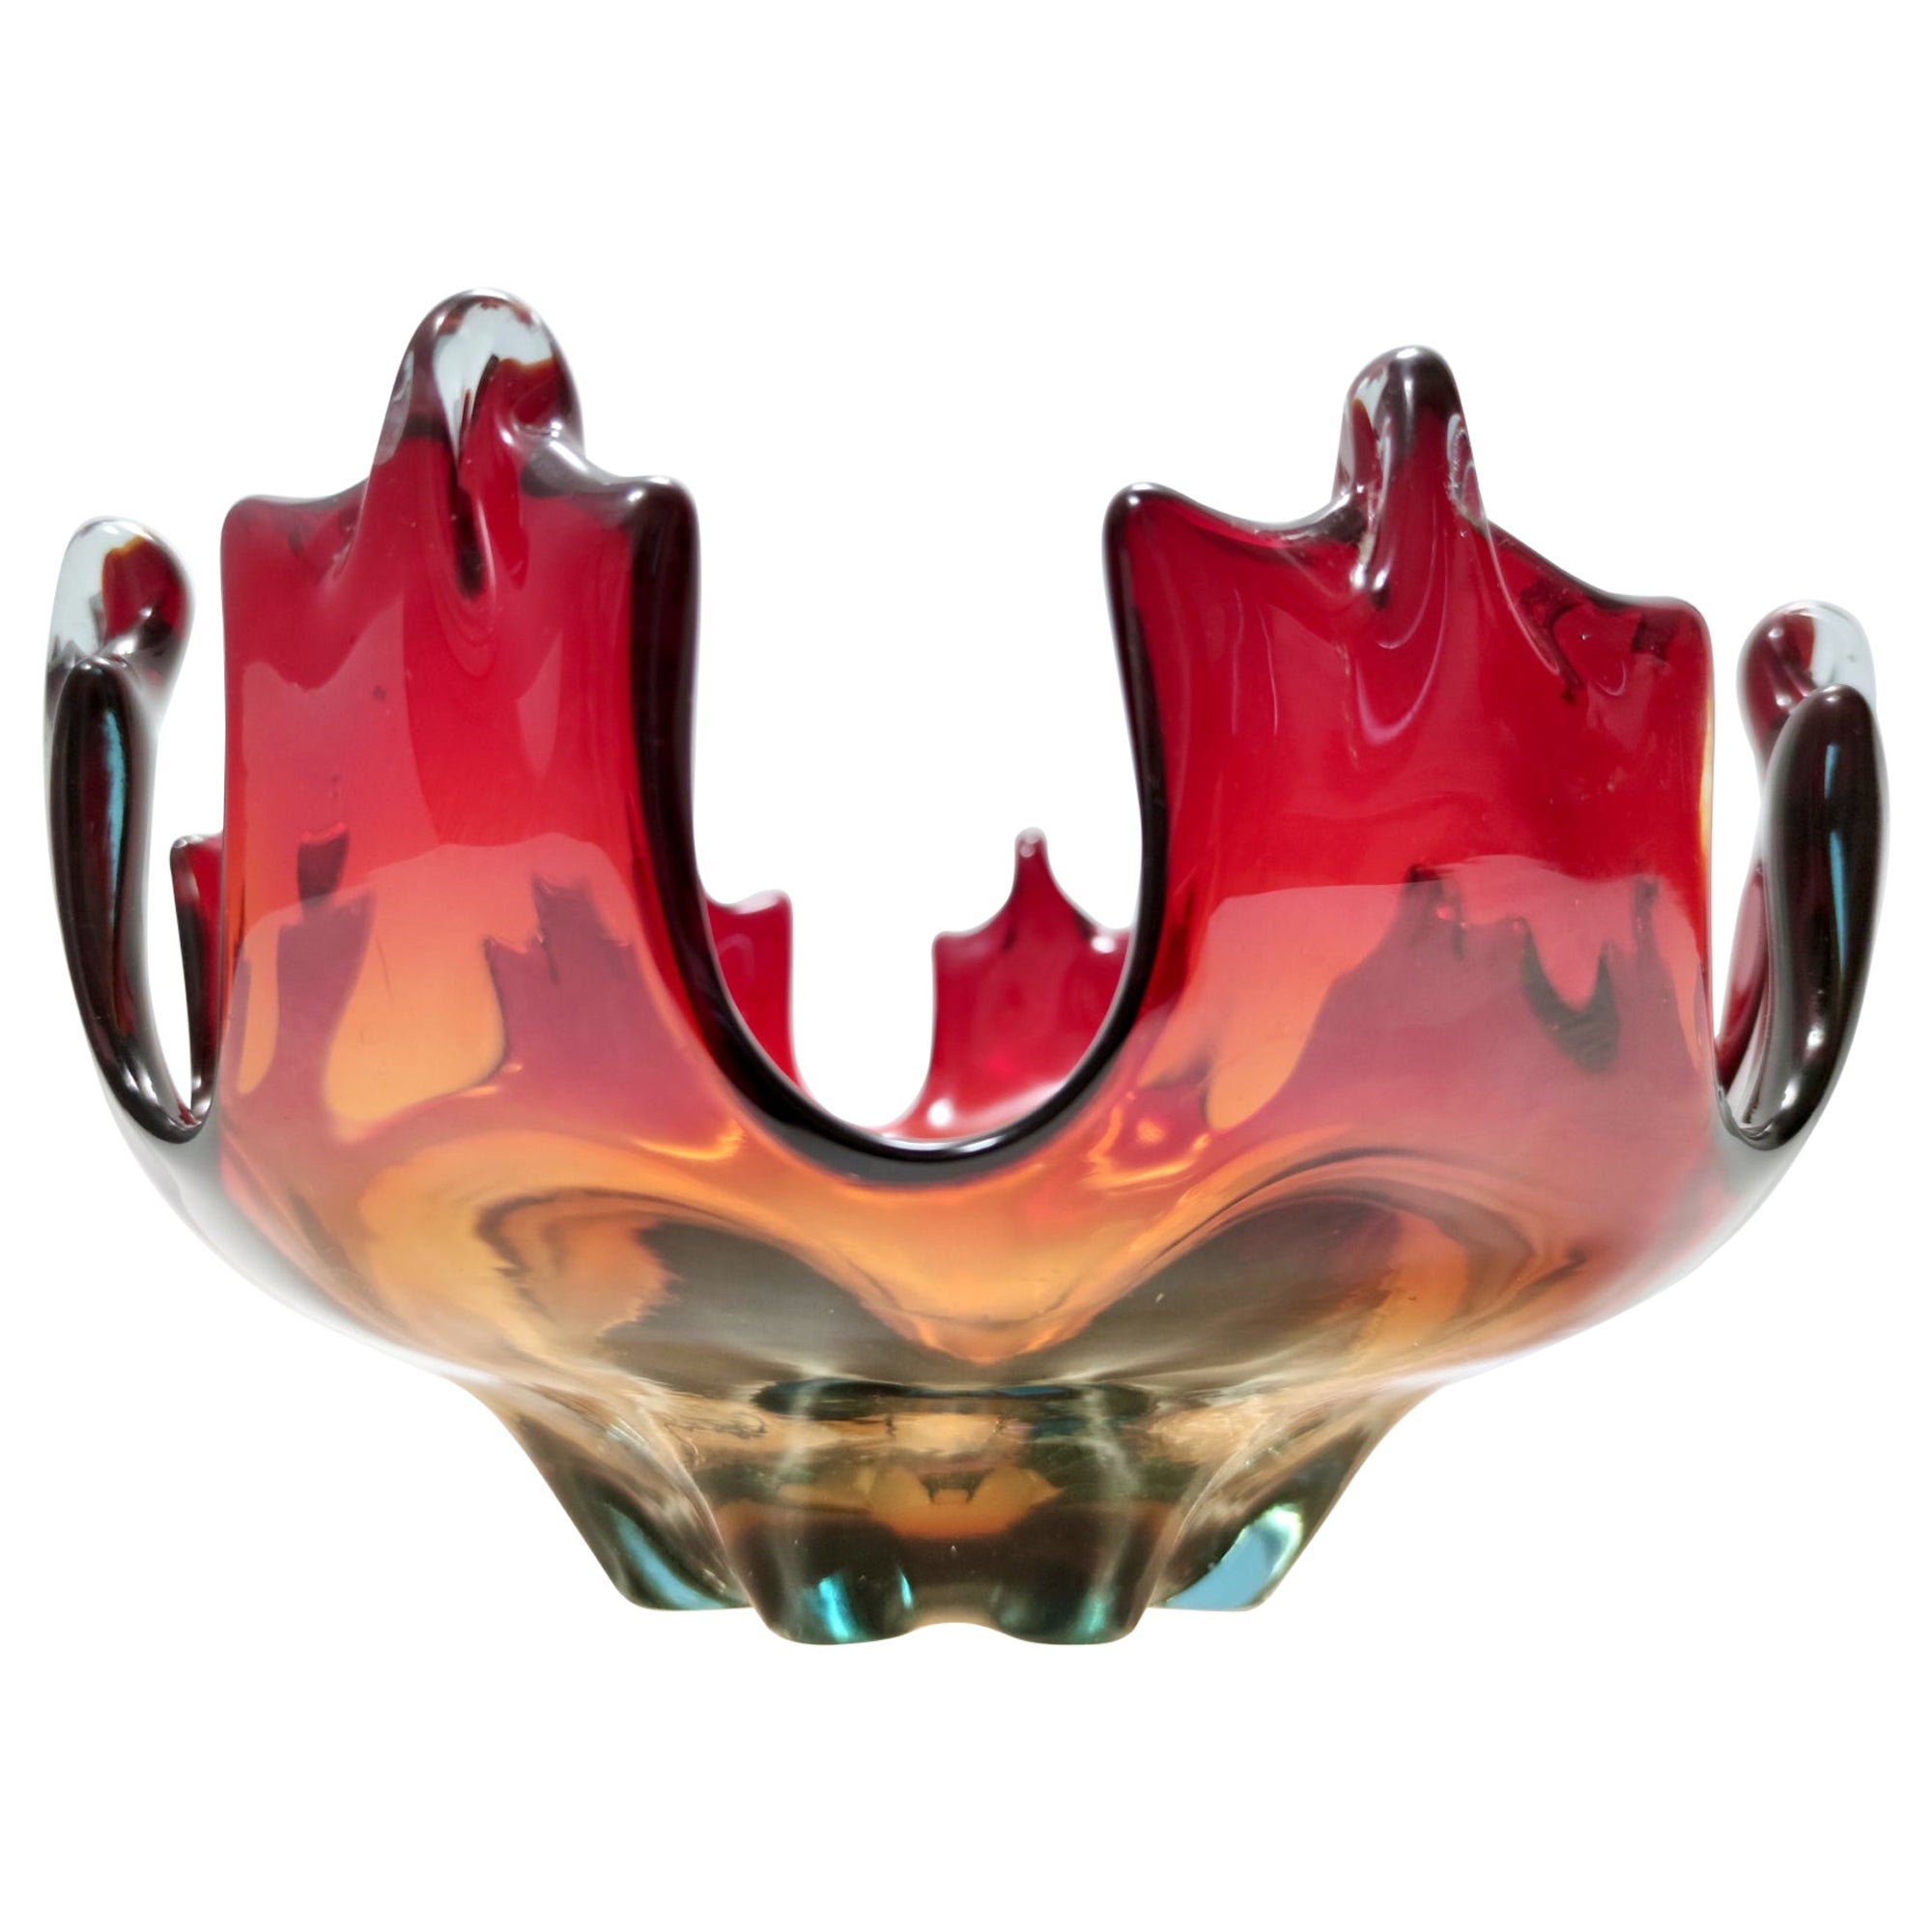 Stunning Midcentury Red and Orange Murano Glass Bowl or Centerpiece, Italy